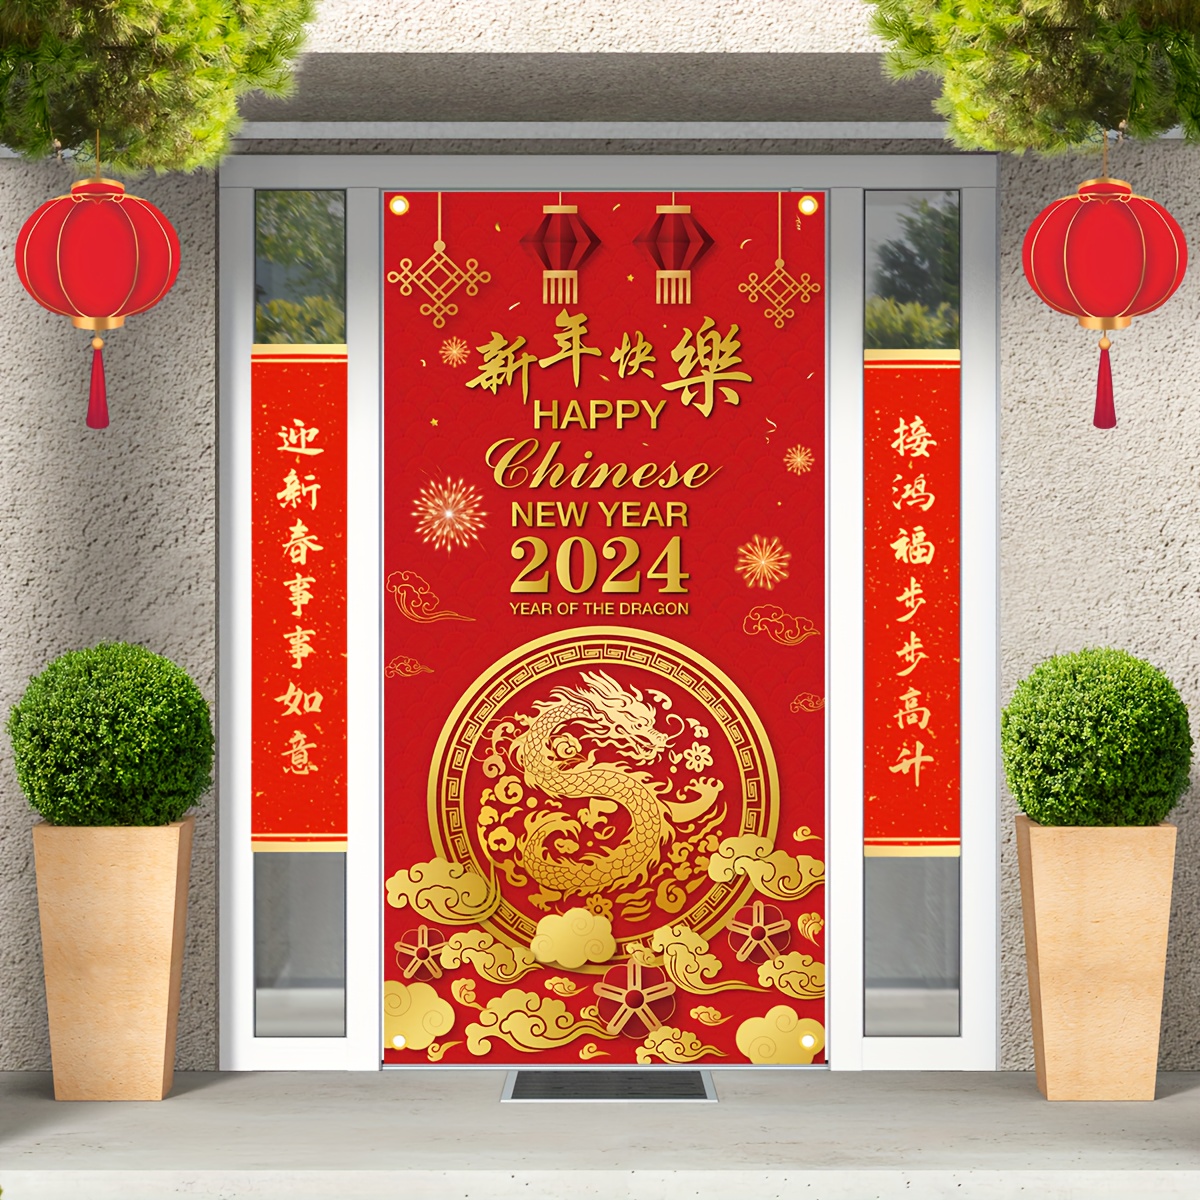 1Pc,71x35in 2024 Chinese New Year Banner Photography Backdrop Chinese  Spring Festival Door Banner Red New Year Photo Booth Background For Chinese  Holi